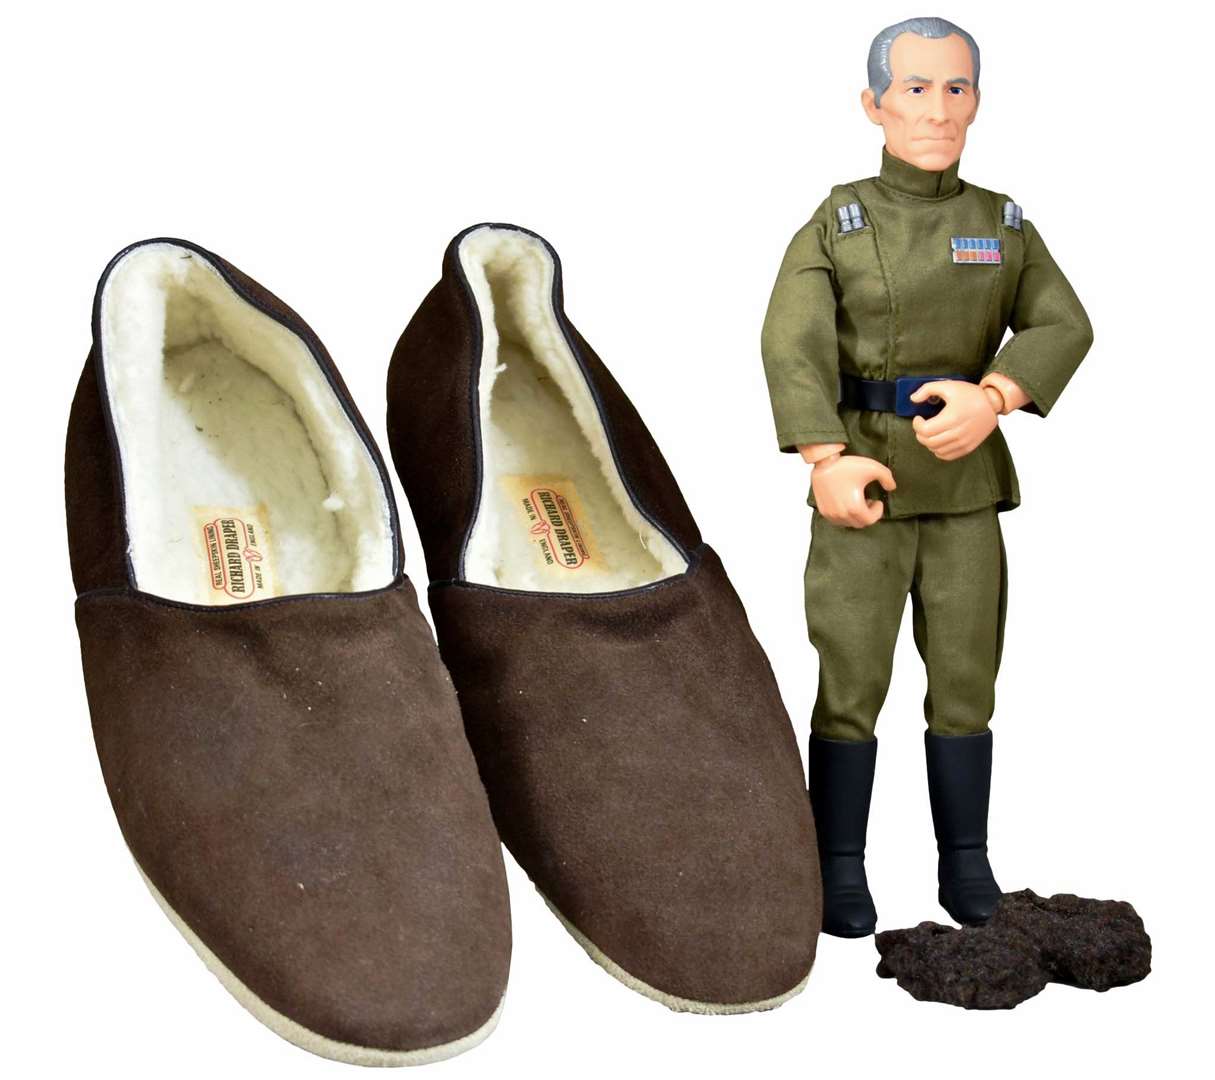 Slippers and a model made for Cushing by the props department of Star Wars was a star lot, but did not sell